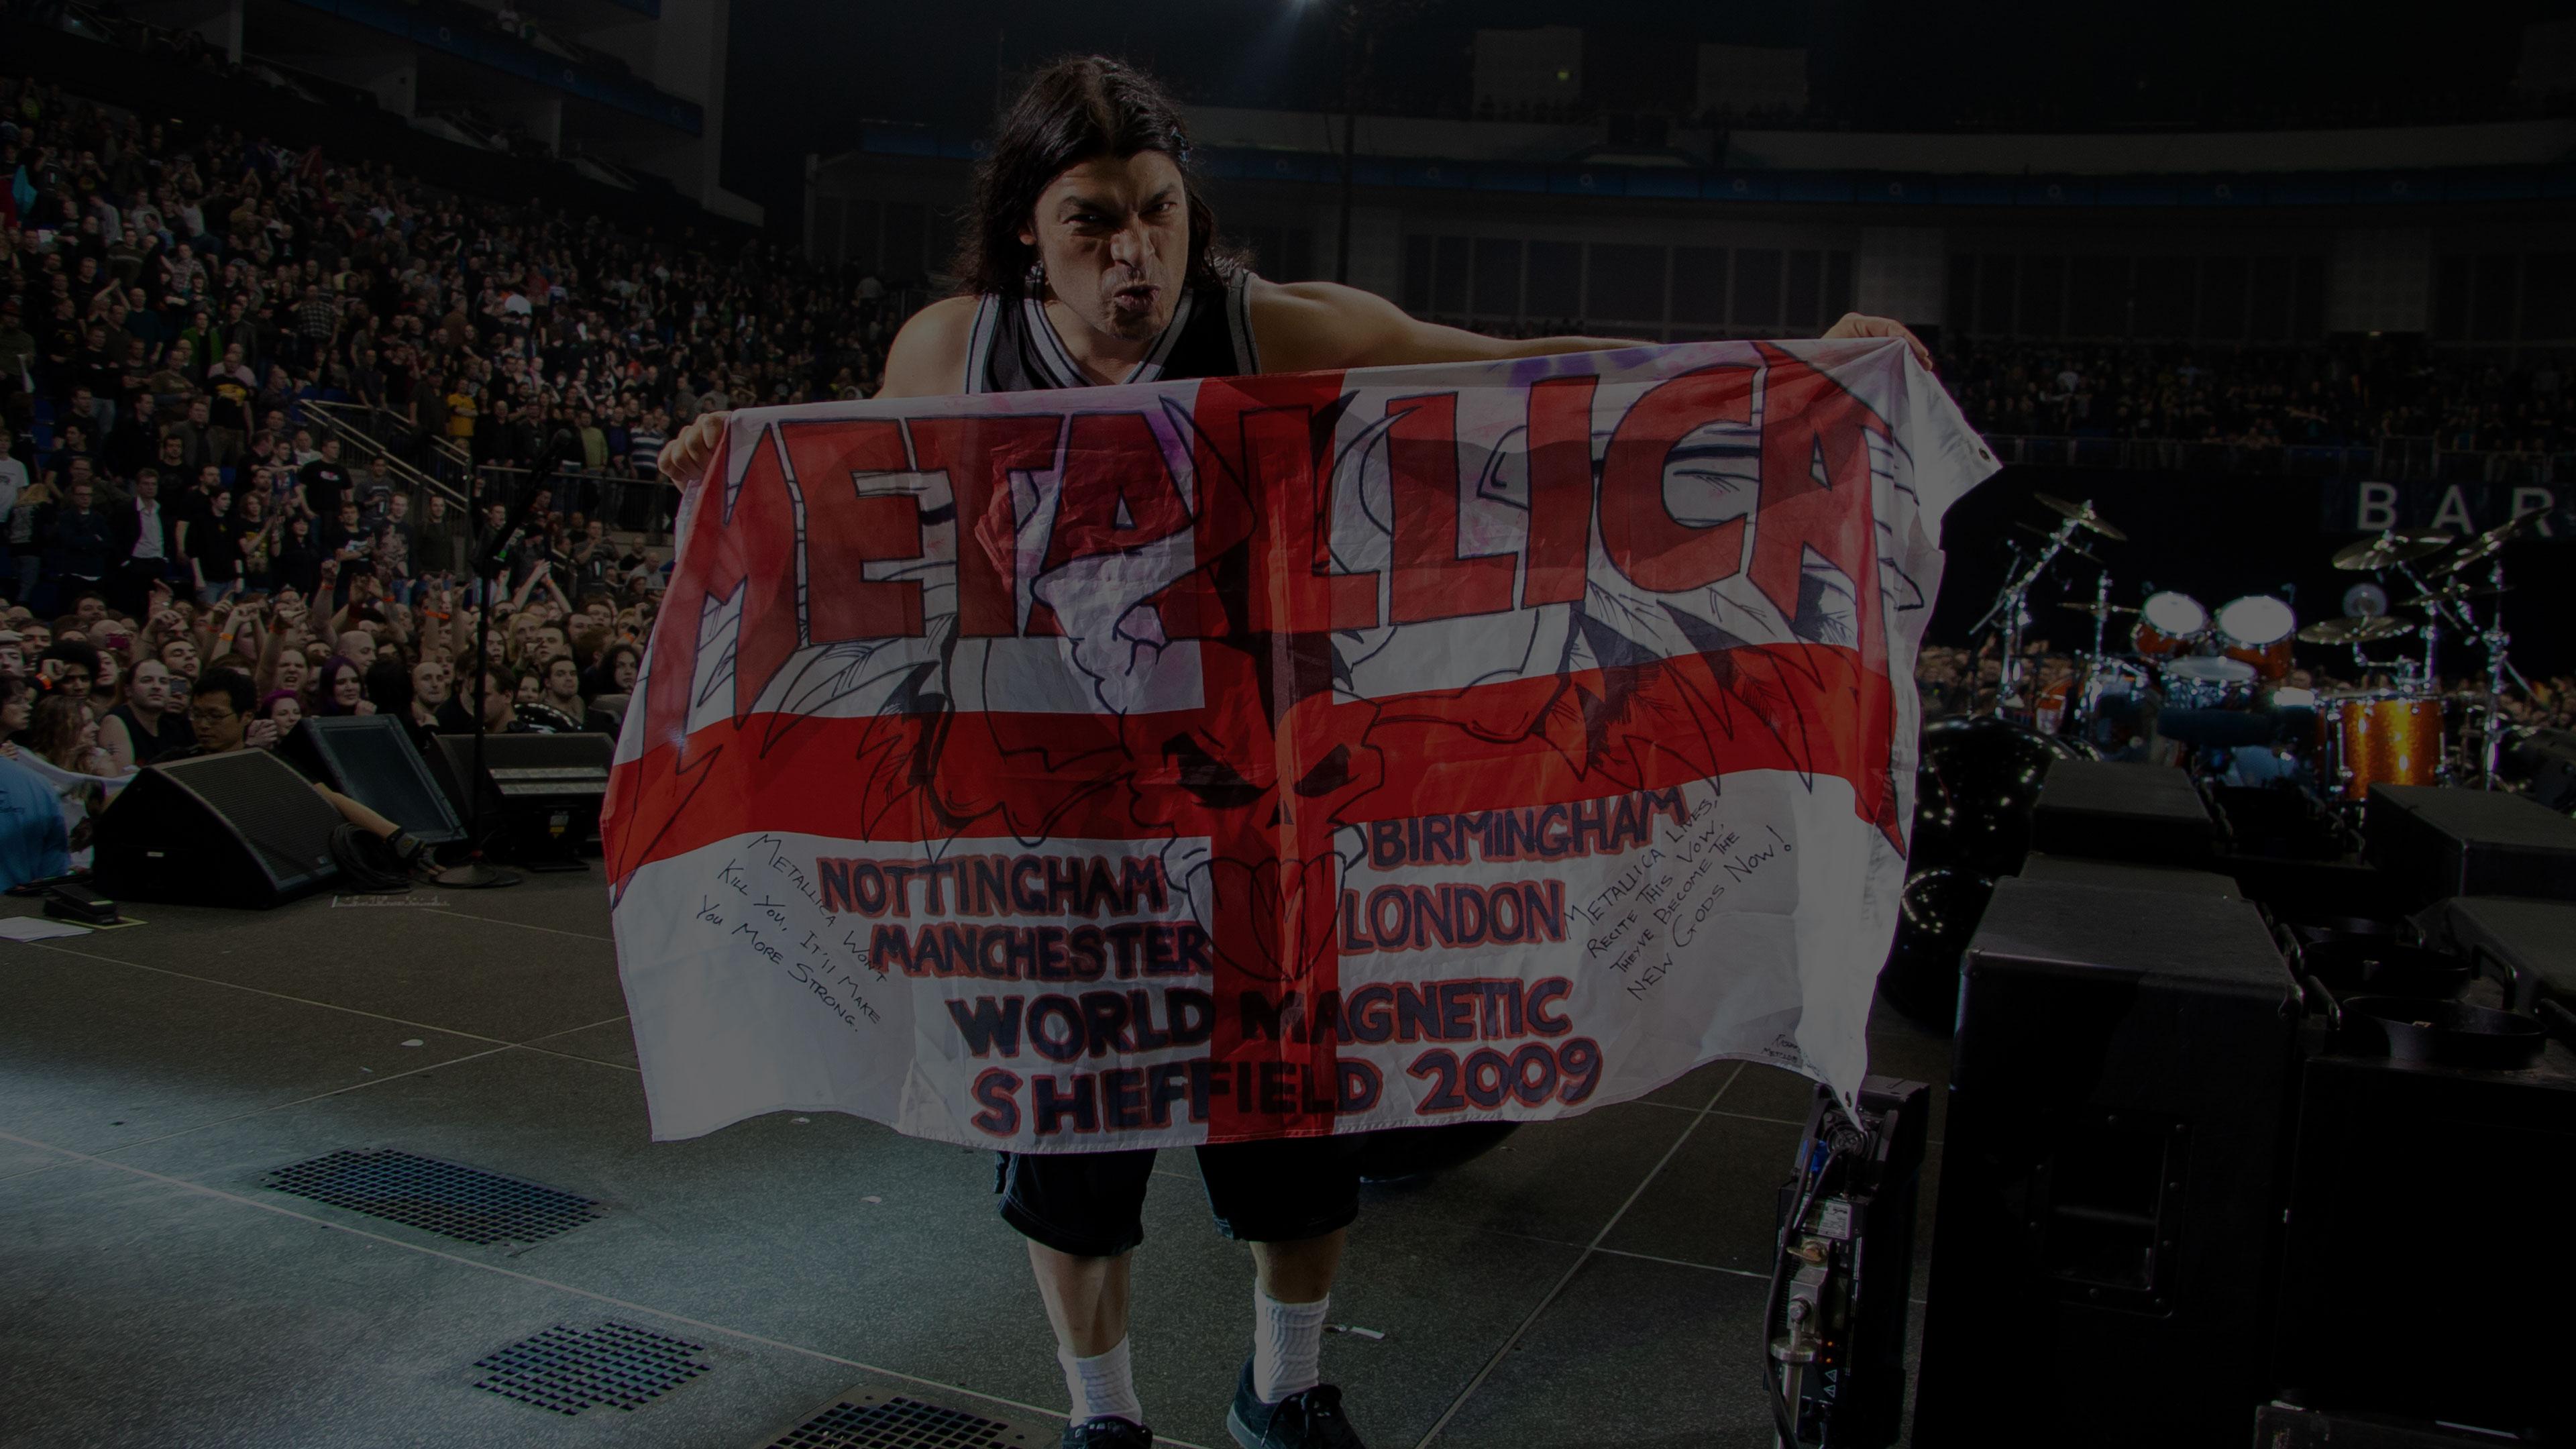 Metallica at The O2 Arena in London, England on March 28, 2009